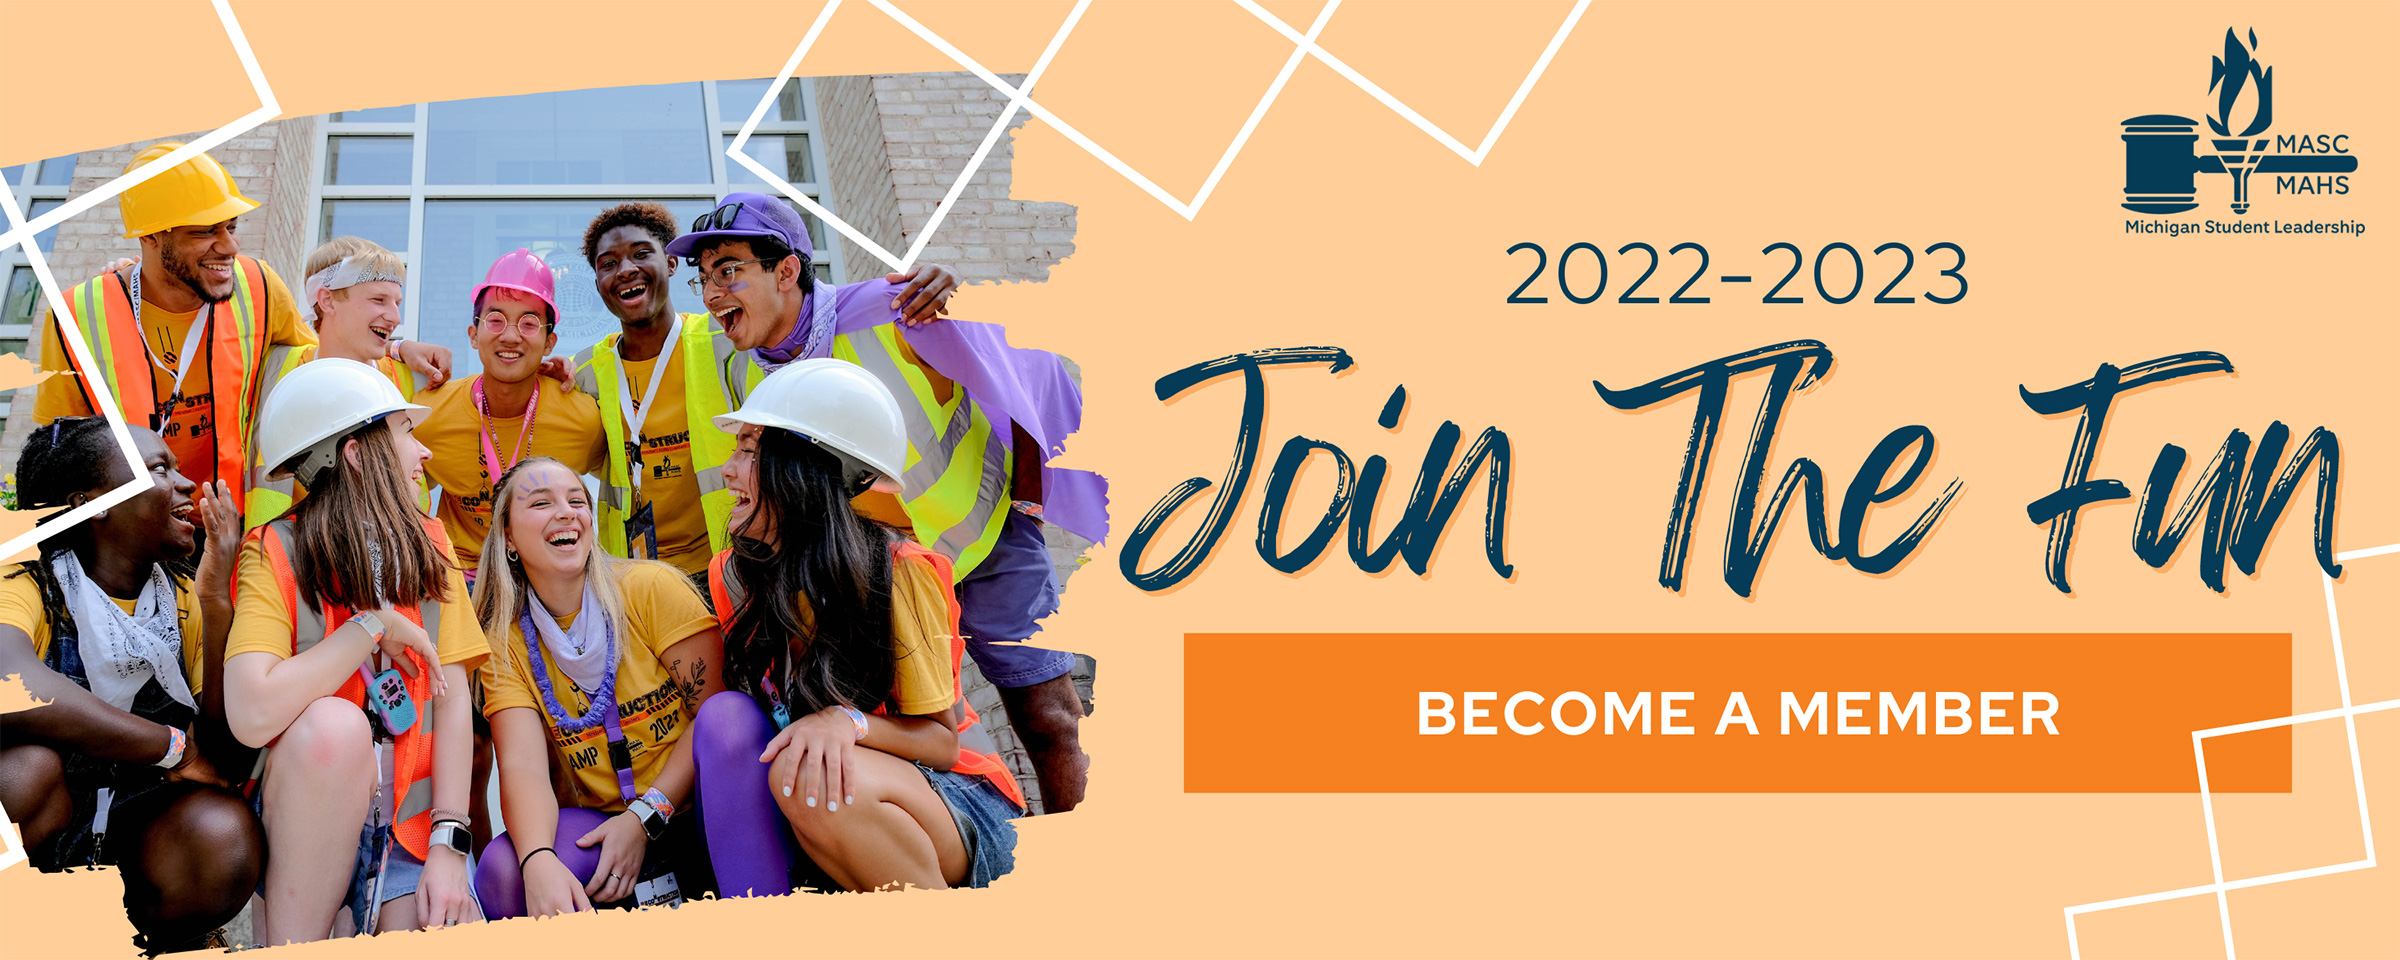 2022-2023 - Join the fun - become a member.